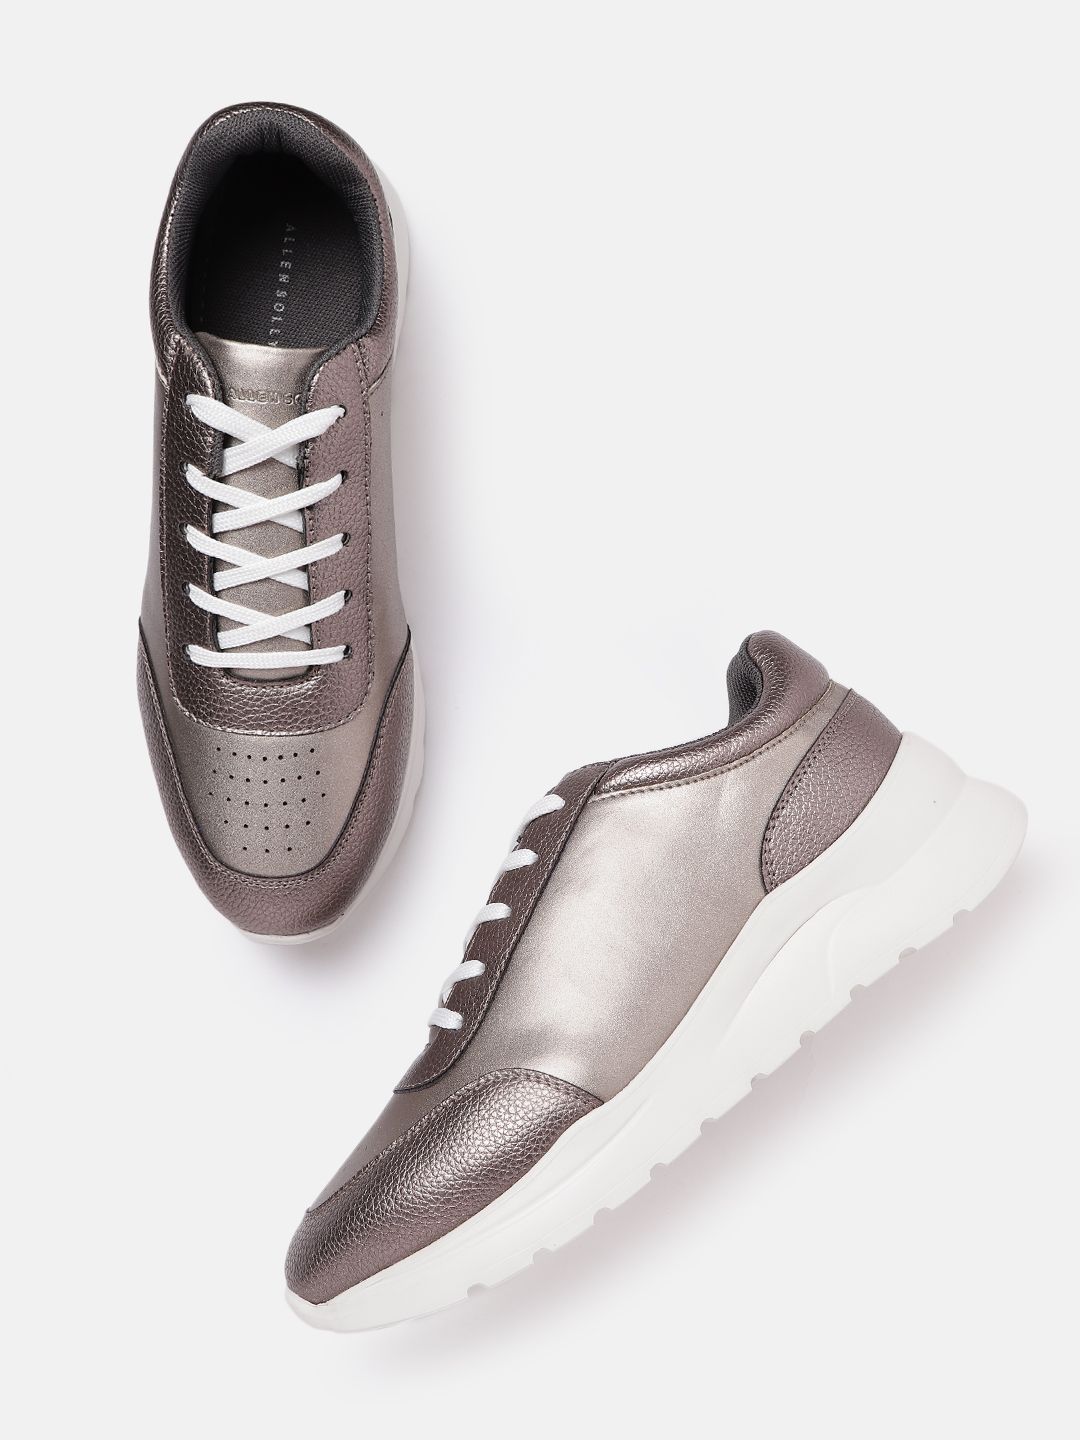 Allen Solly Women Gunmetal-Toned Perforated Chunky Sneakers Price in India